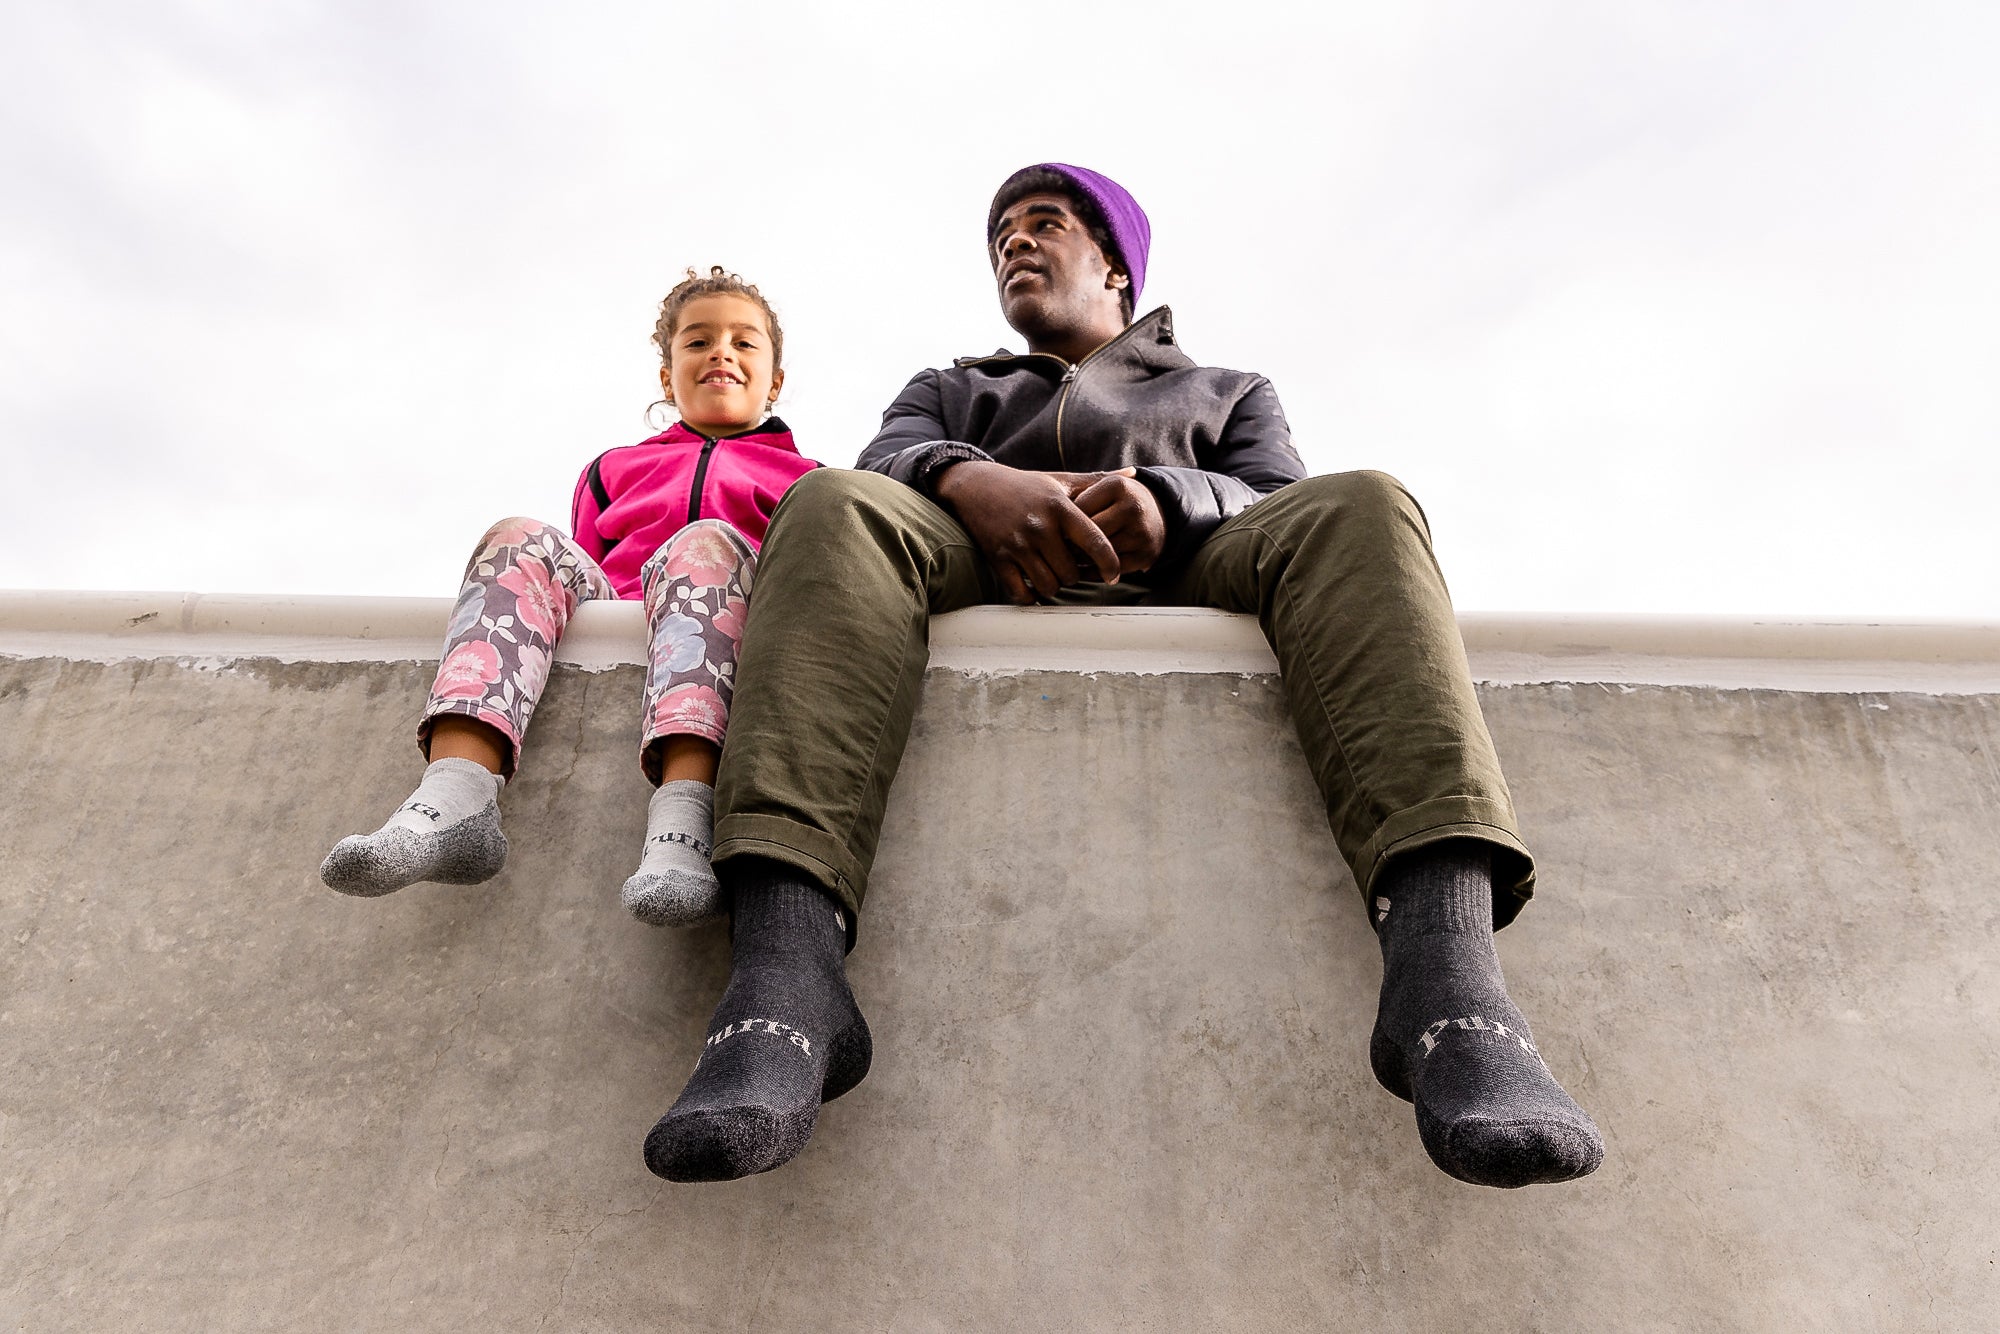 A view looking up at a dark skin toned father and his daughter sitting on a concrete wall.  The little girl is wearing pink flowery pants and bubblegum pink jacket.  On her feet she has the light grey Purra no show socks.  The father has khaki green long pants and a brown jacket with a purple beanie on his head.  On his feet he has the dark grey Purra Crew socks